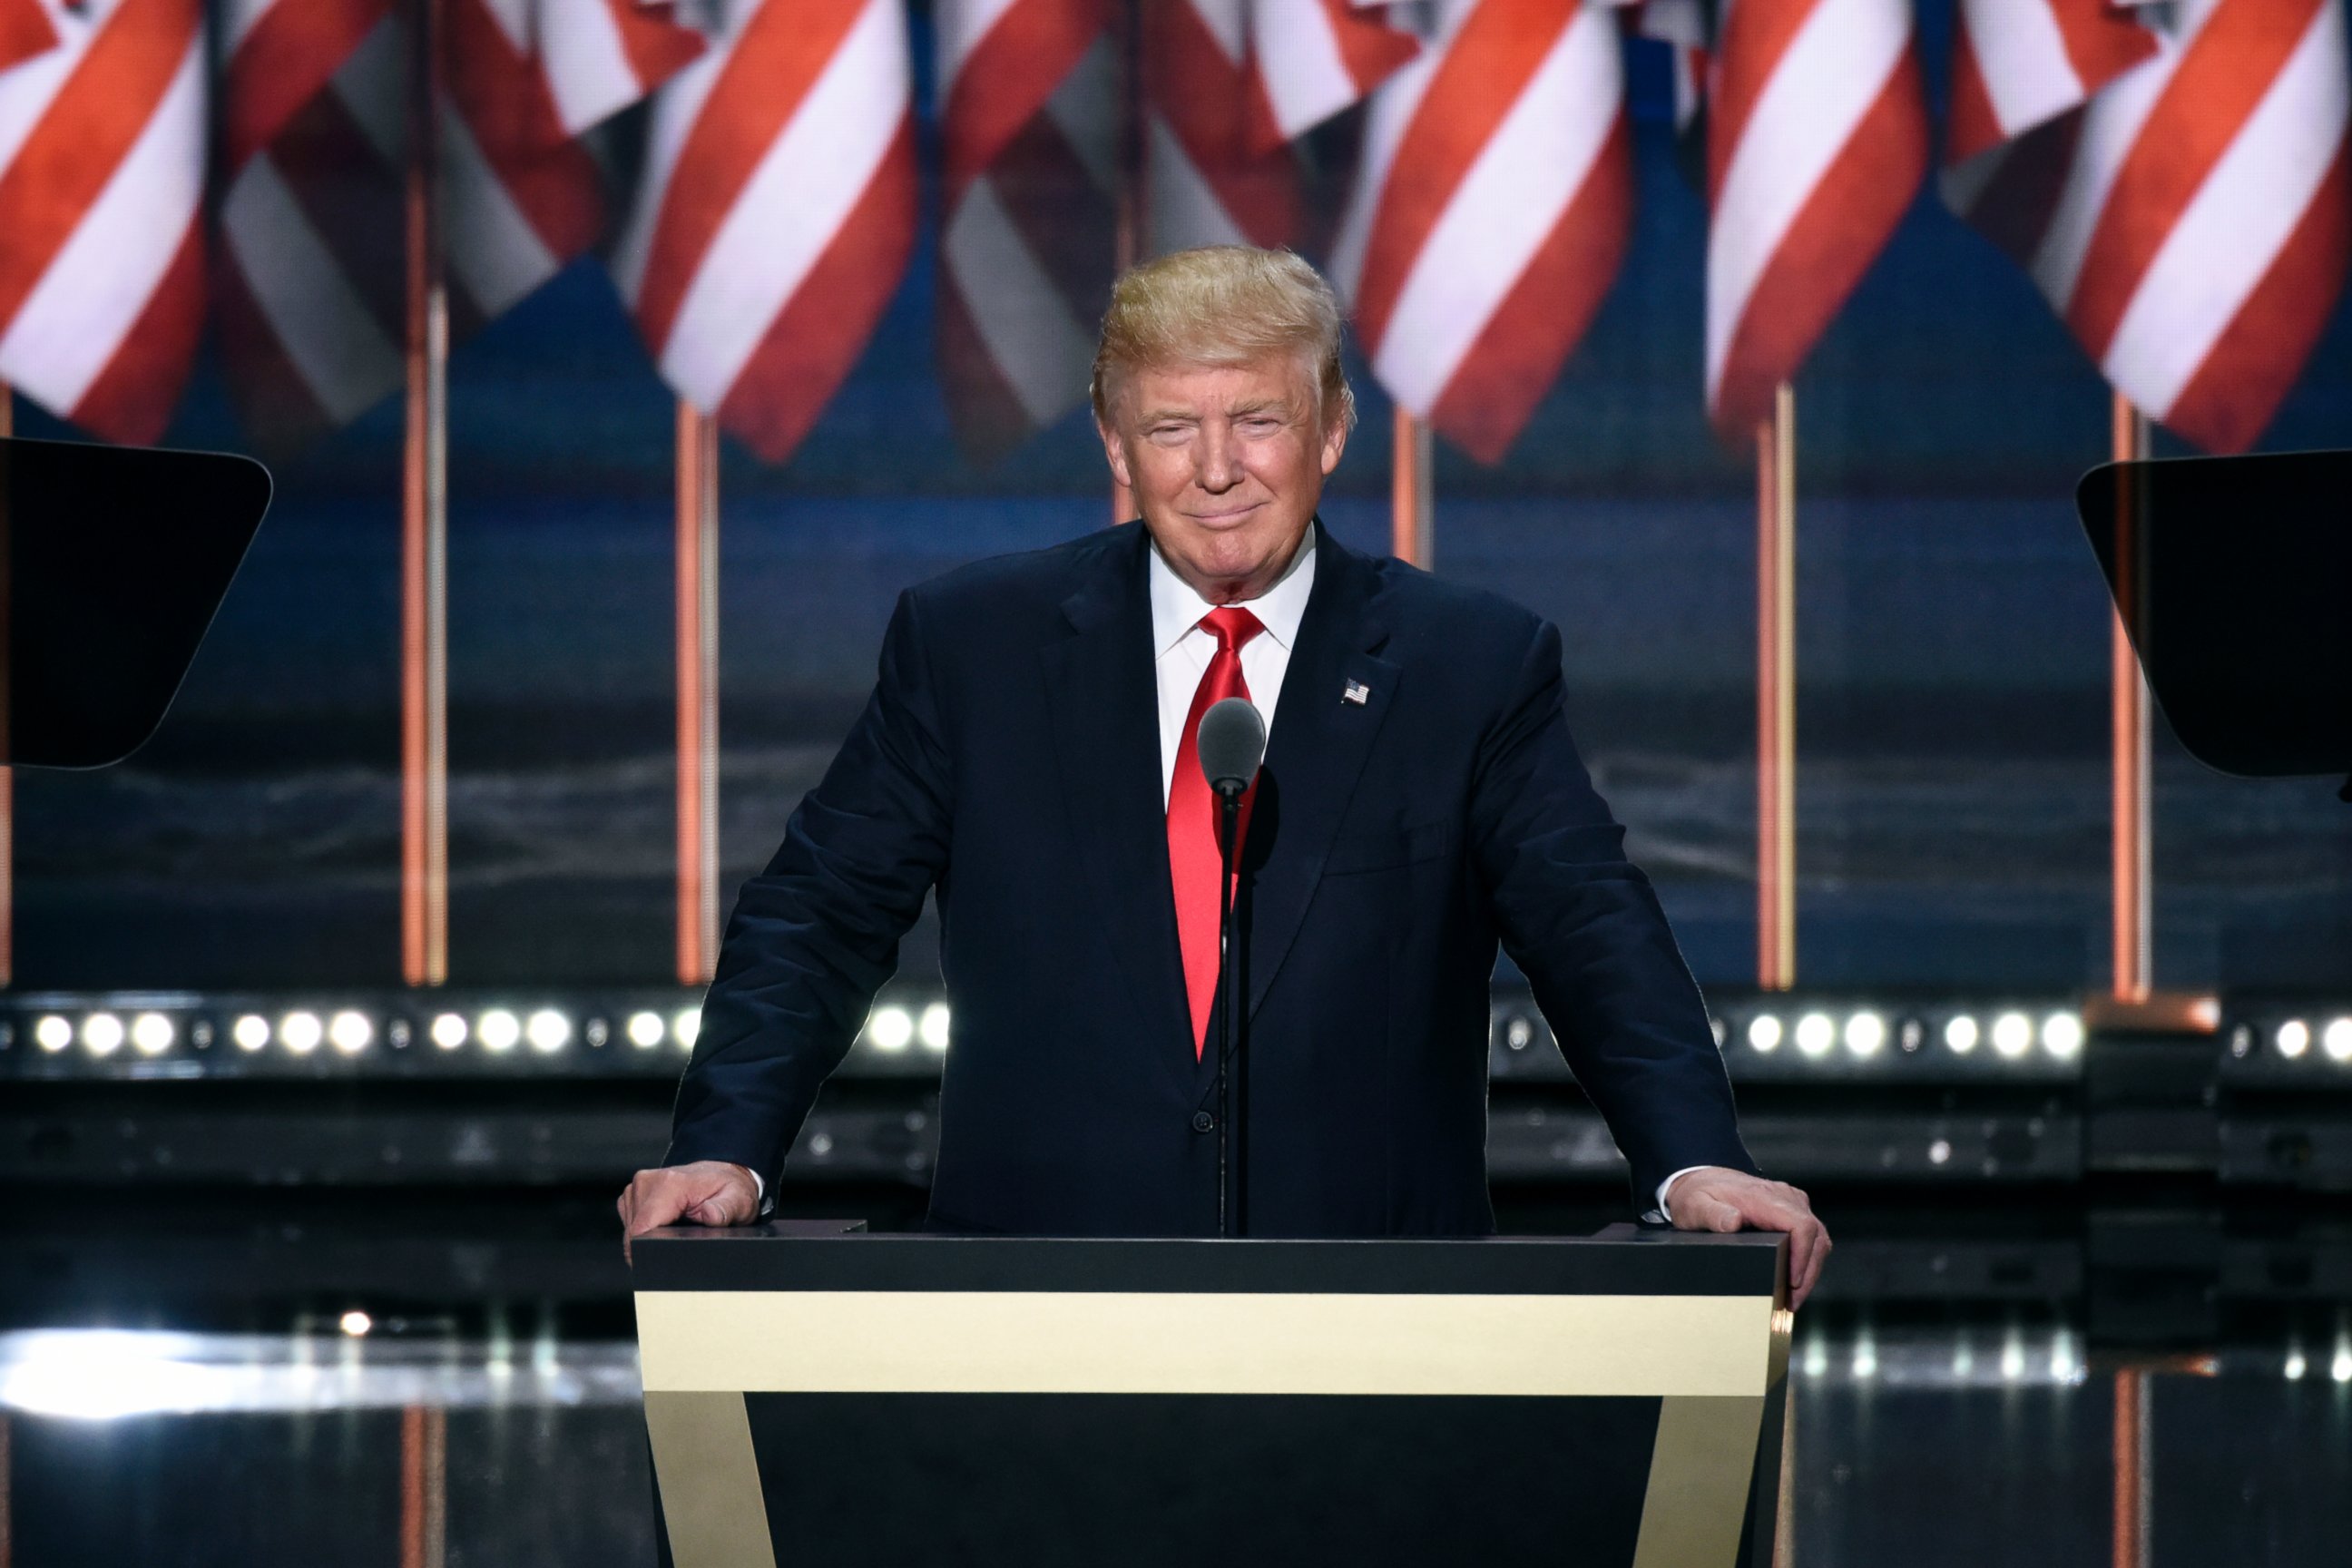 PHOTO: Donald Trump speaks at the 2016 Republican National Convention from the Quicken Loans Arena in Cleveland, Ohio.